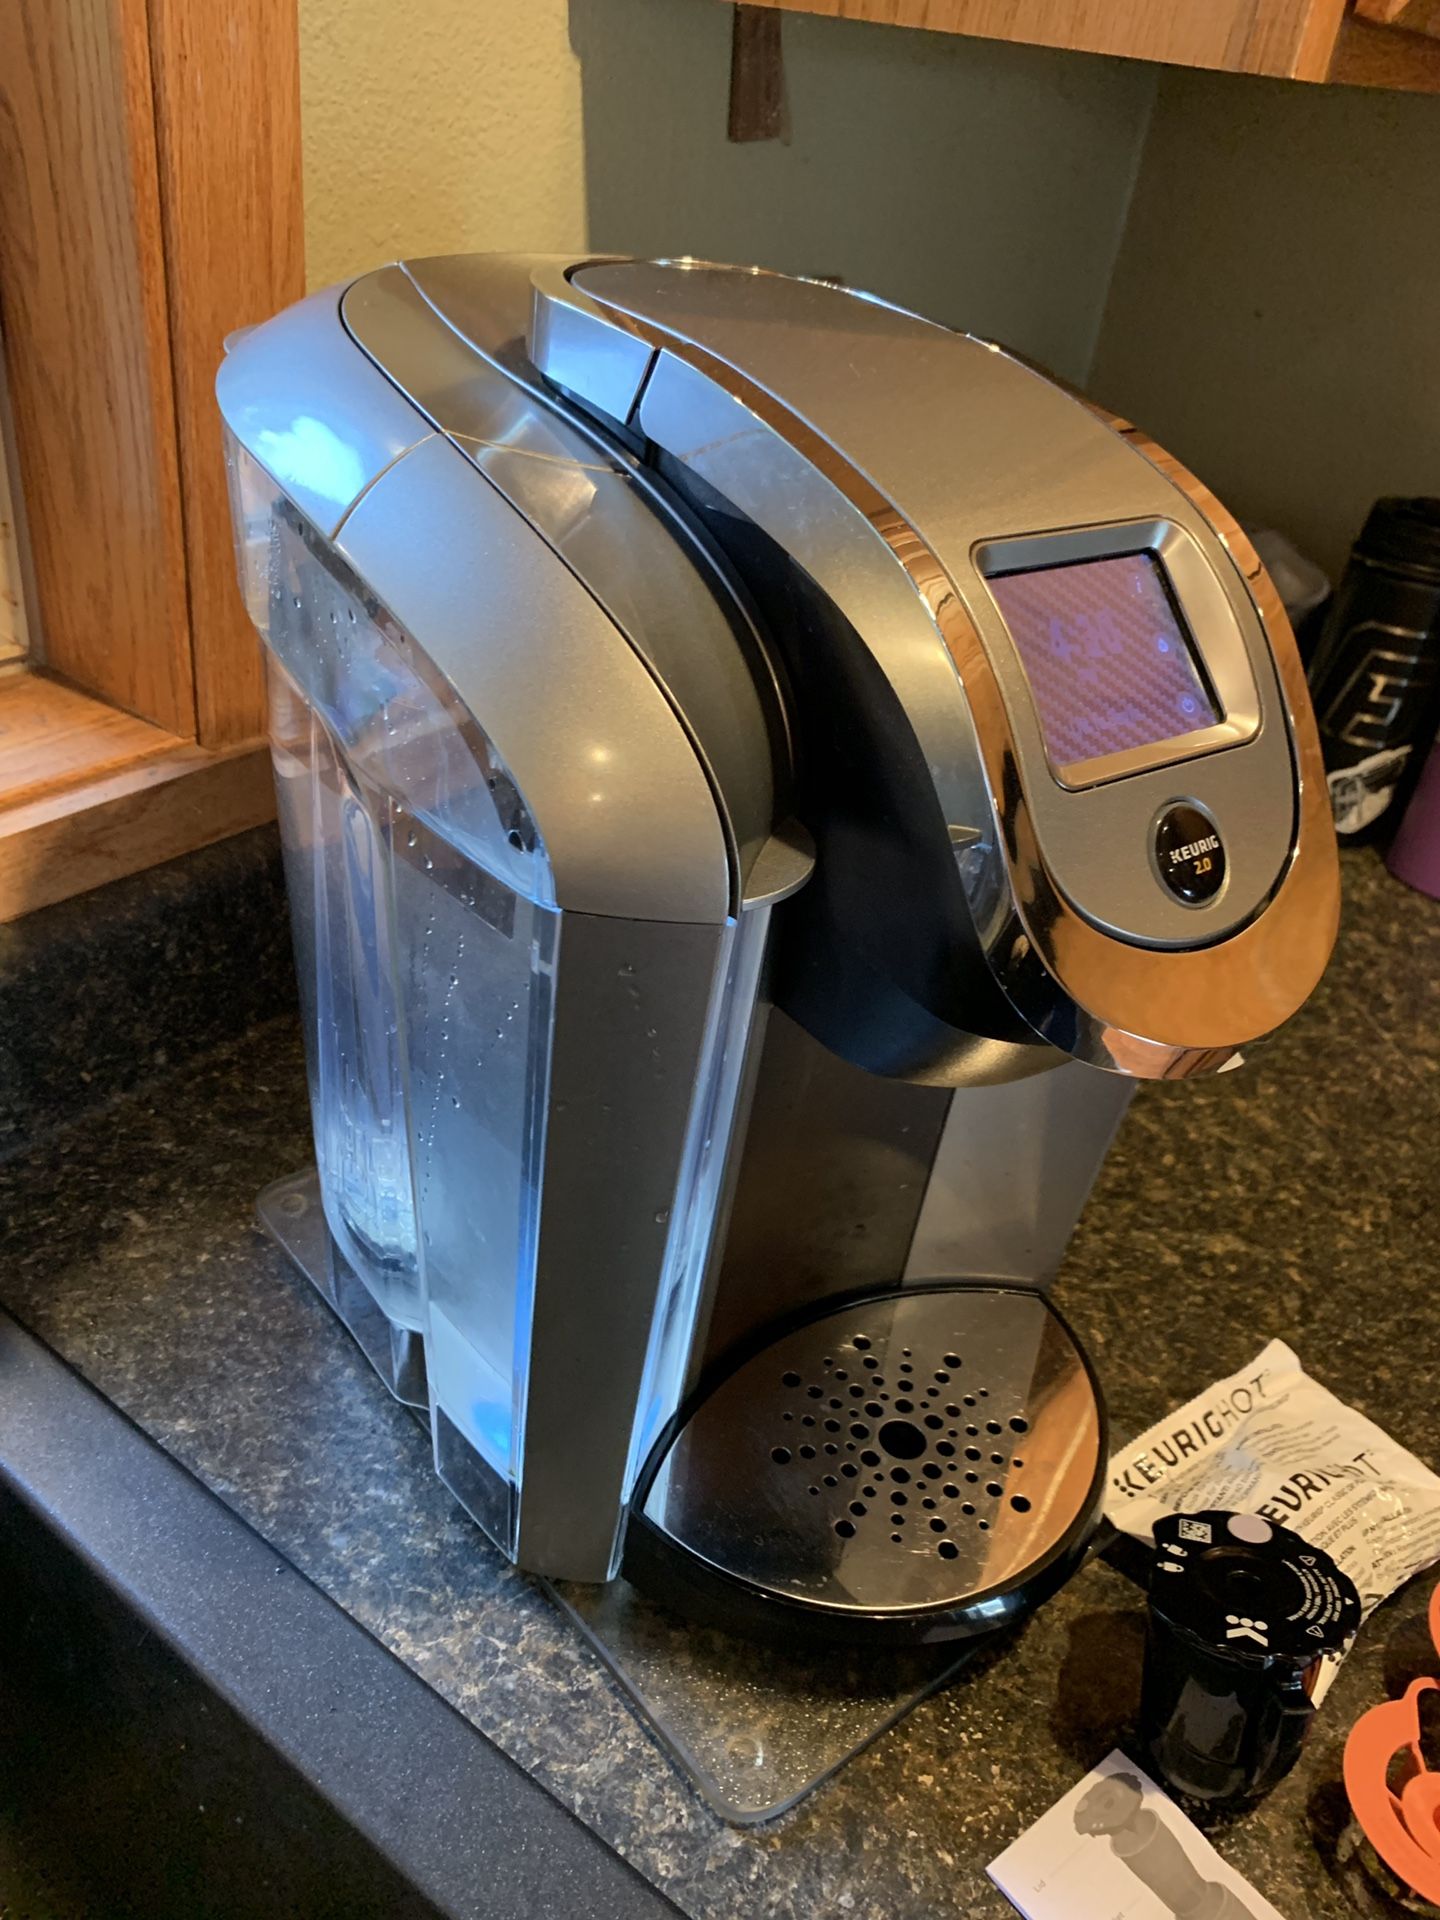 Breville Grind Control Coffee Maker (latest Model) for Sale in Portland, OR  - OfferUp